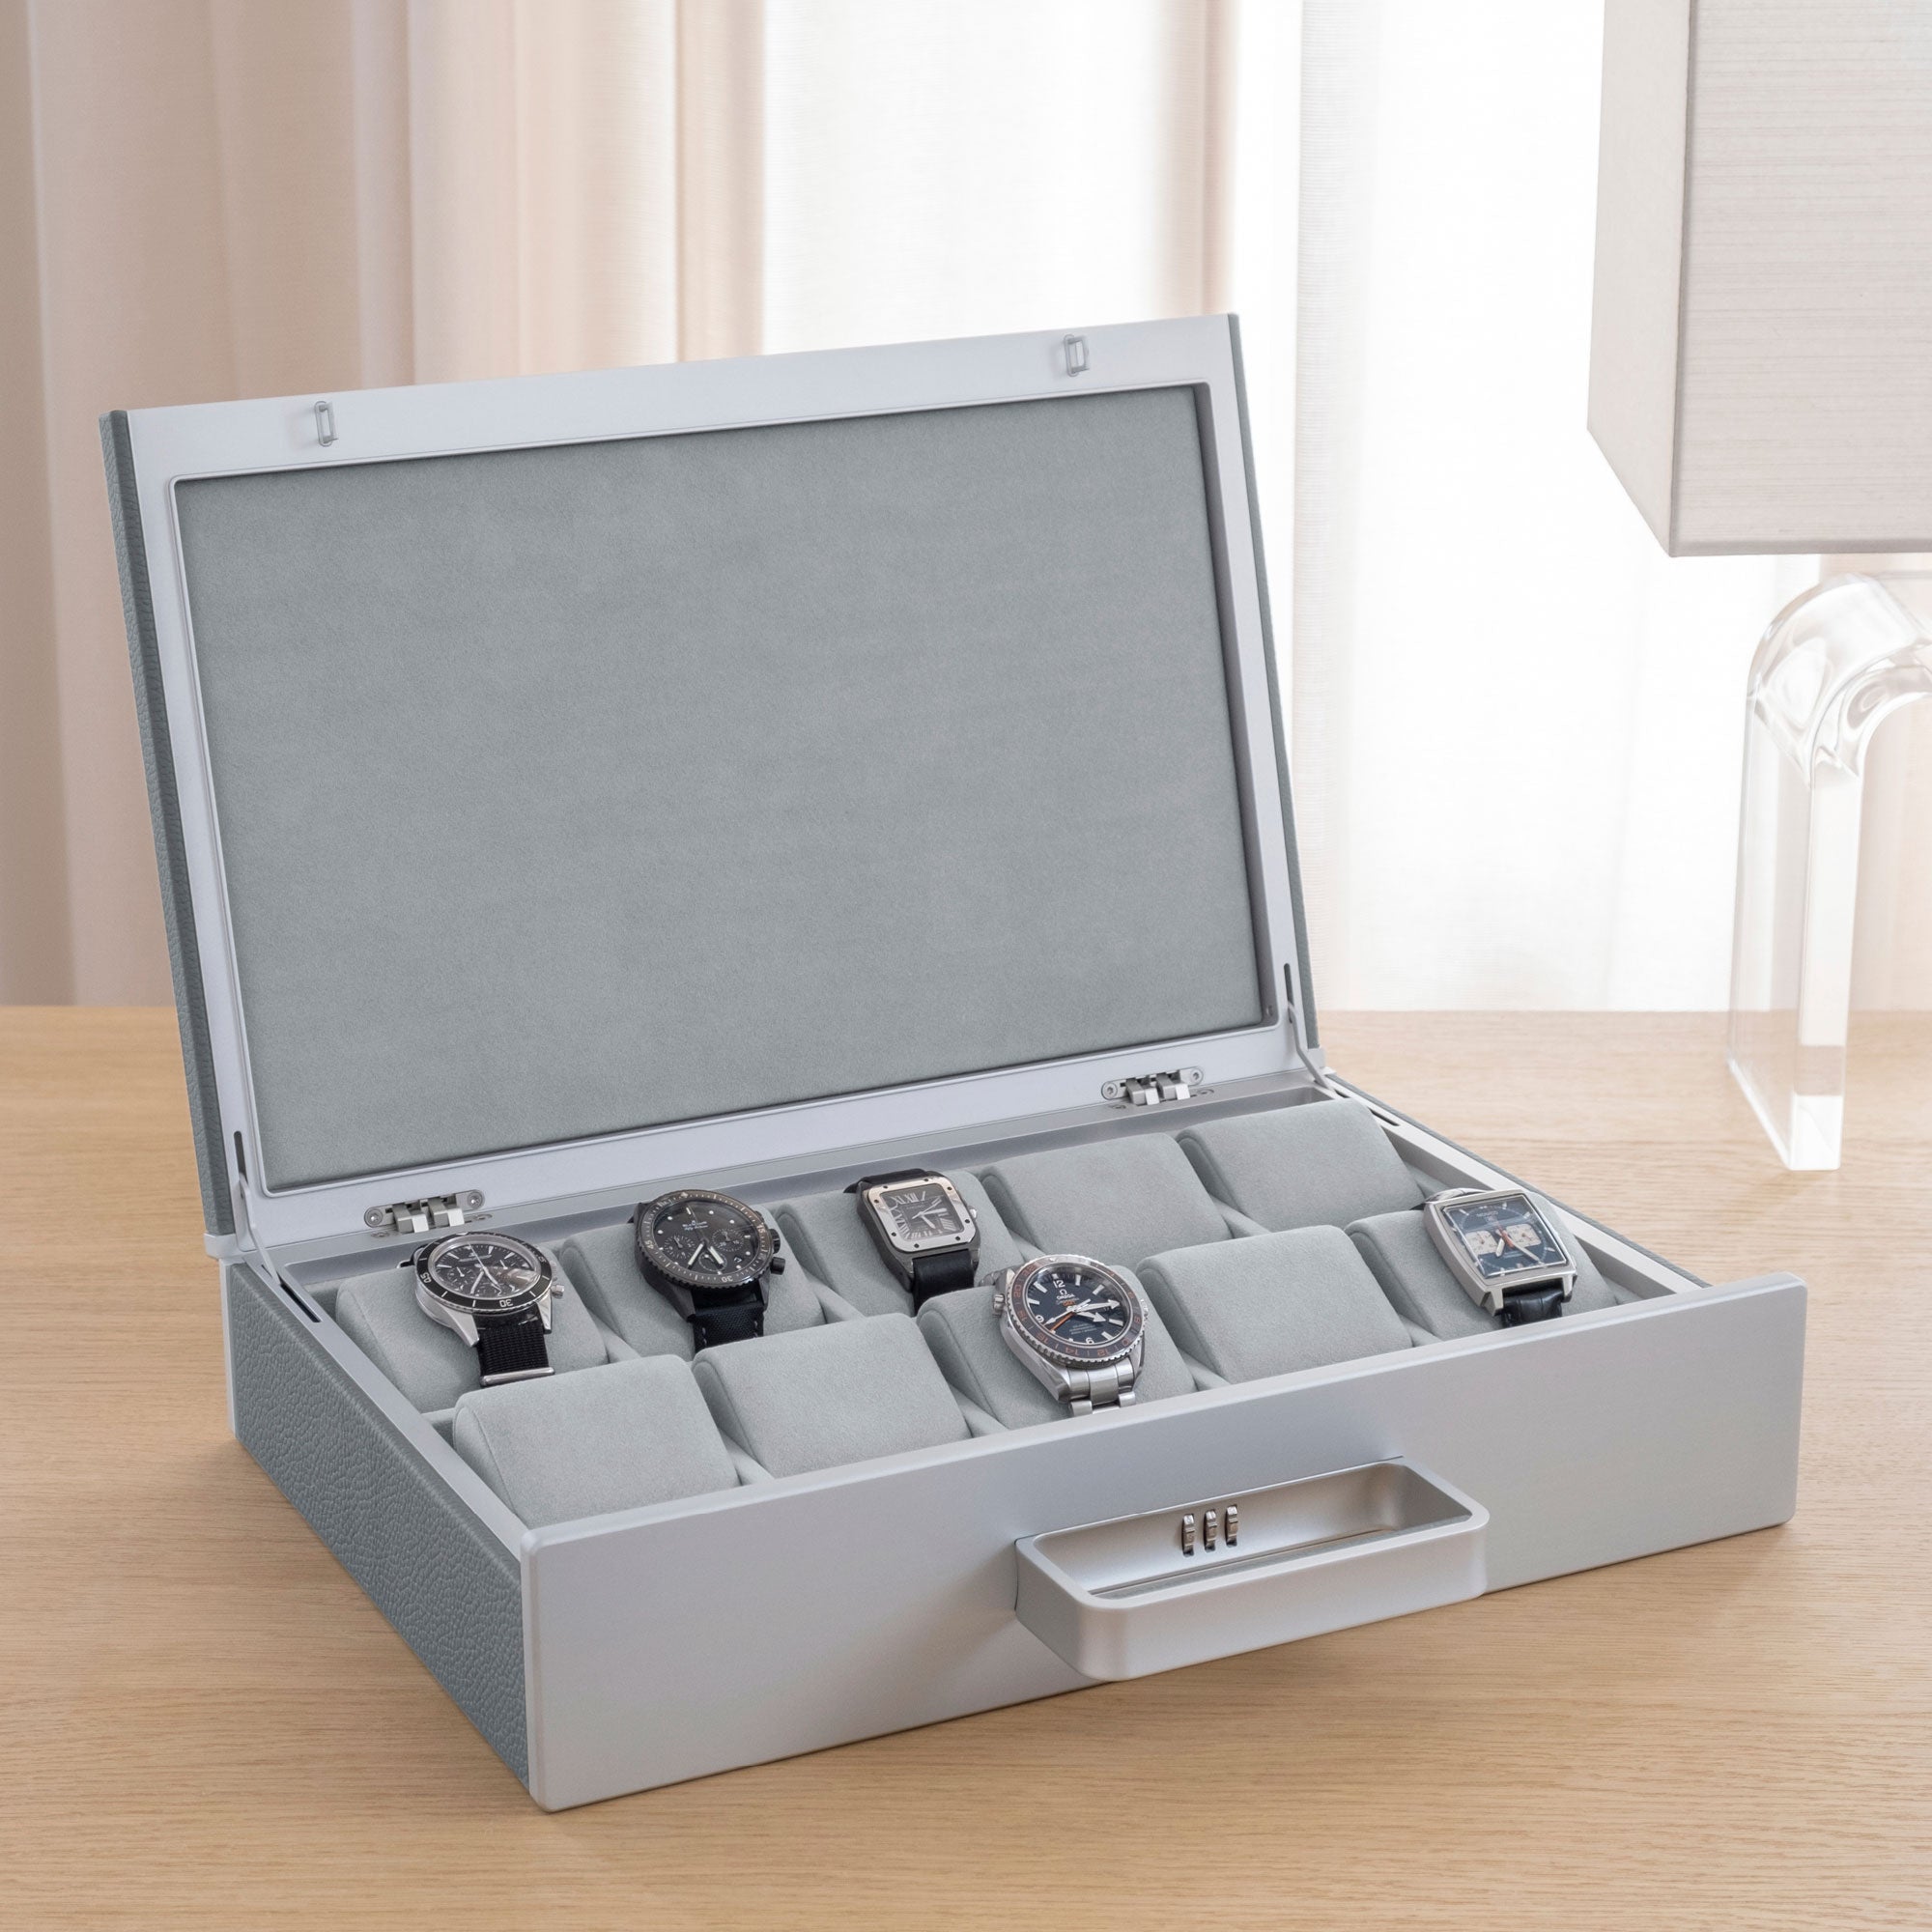 Lifestyle shot of open Mackenzie 10 Watch briefcase in carbon fiber and grey anodized aluminum casing, cloud grey leather and soft fog grey Alcantara made by hand filled with luxury watches including Jaeger-LeCoultre, Blancpain and Omega